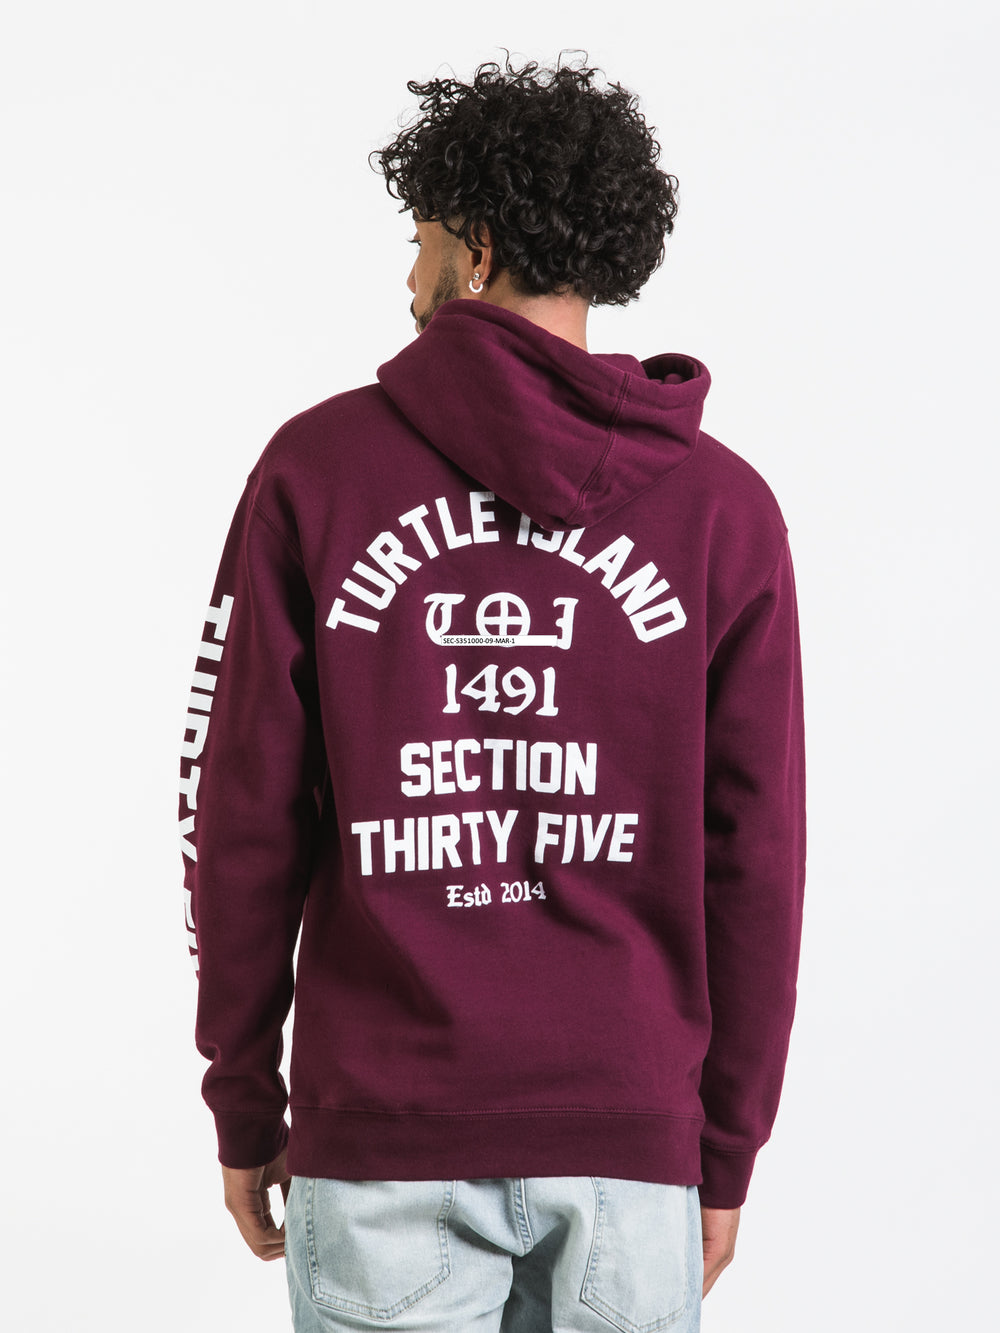 SECTION 35 TILTE SHOT PULLOVER HOODIE  - CLEARANCE